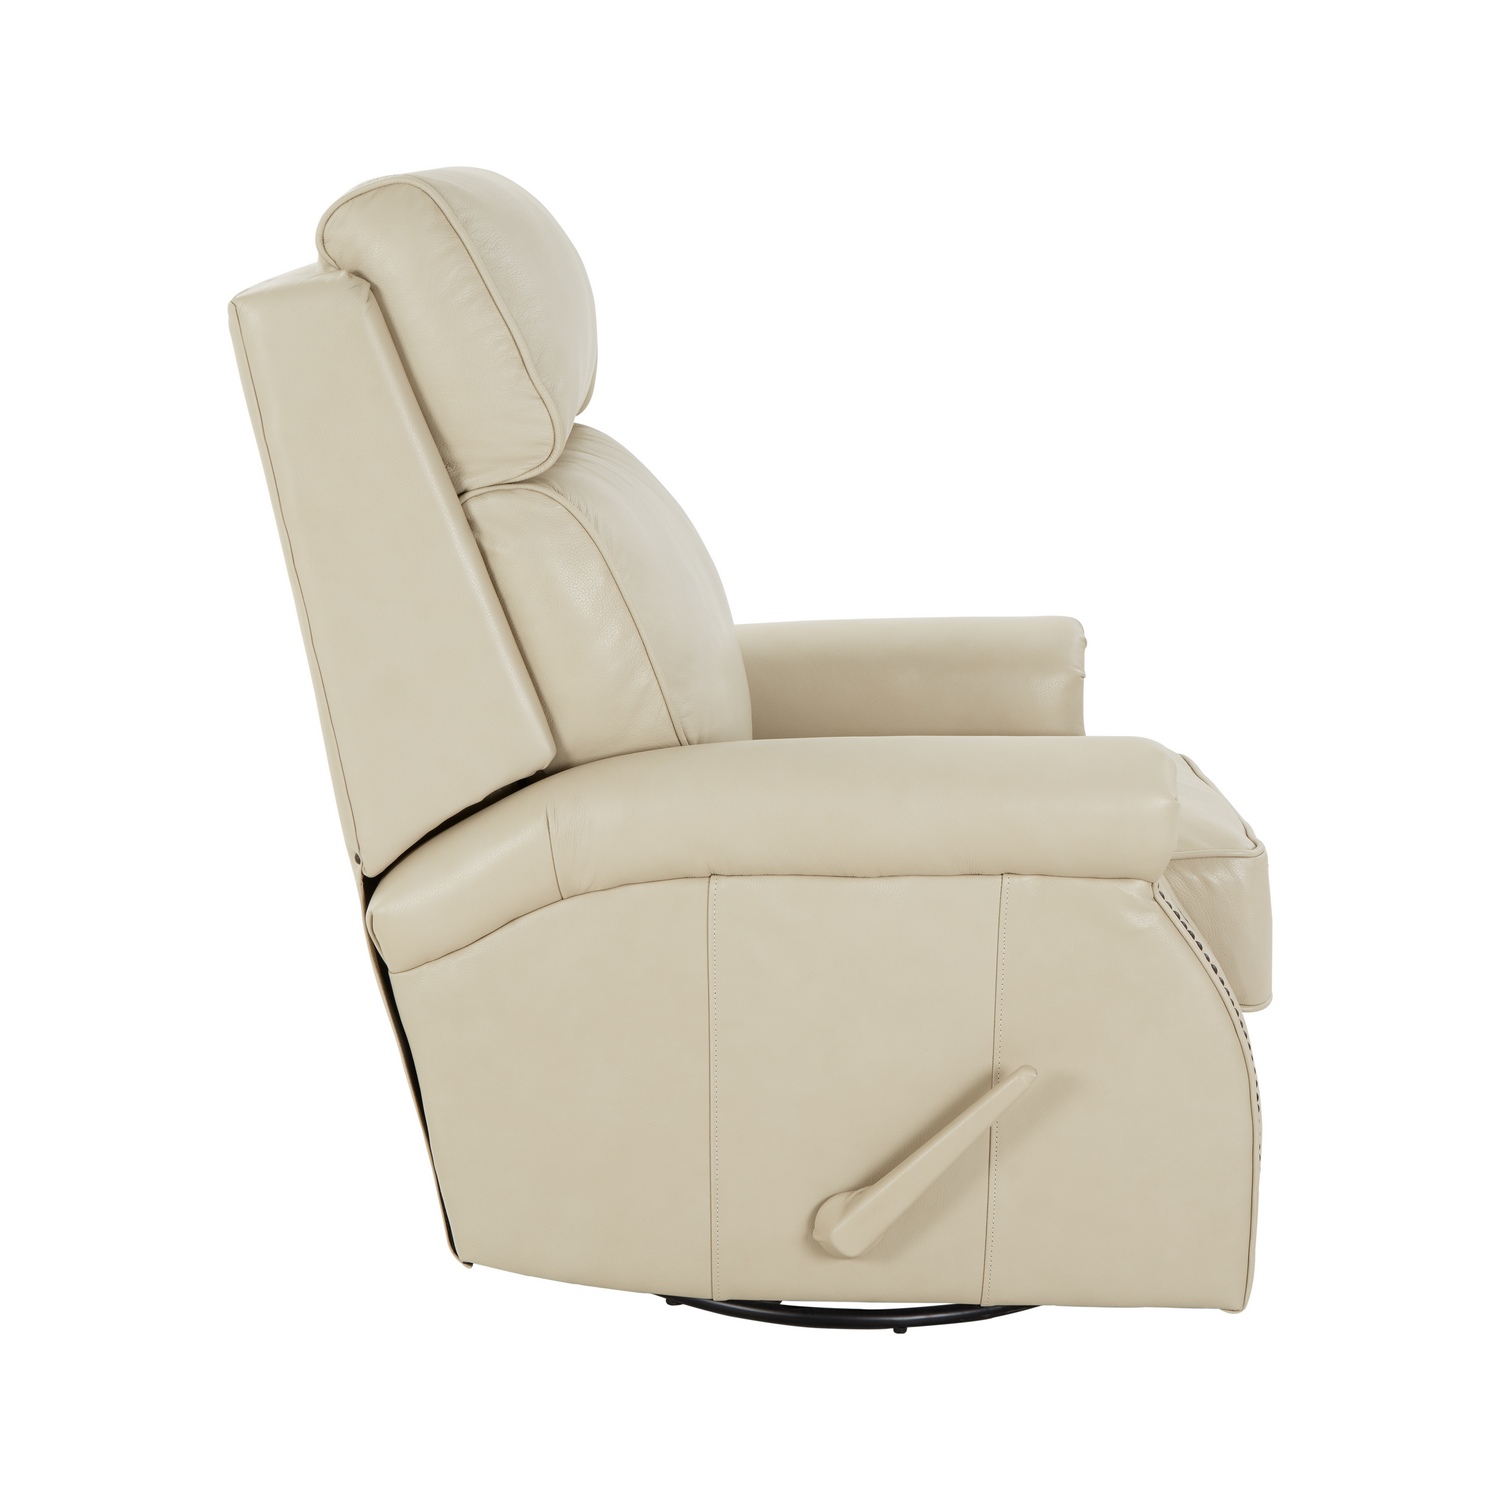 Barcalounger Crews Swivel Glider Recliner Chair - Barone Parchment/All Leather